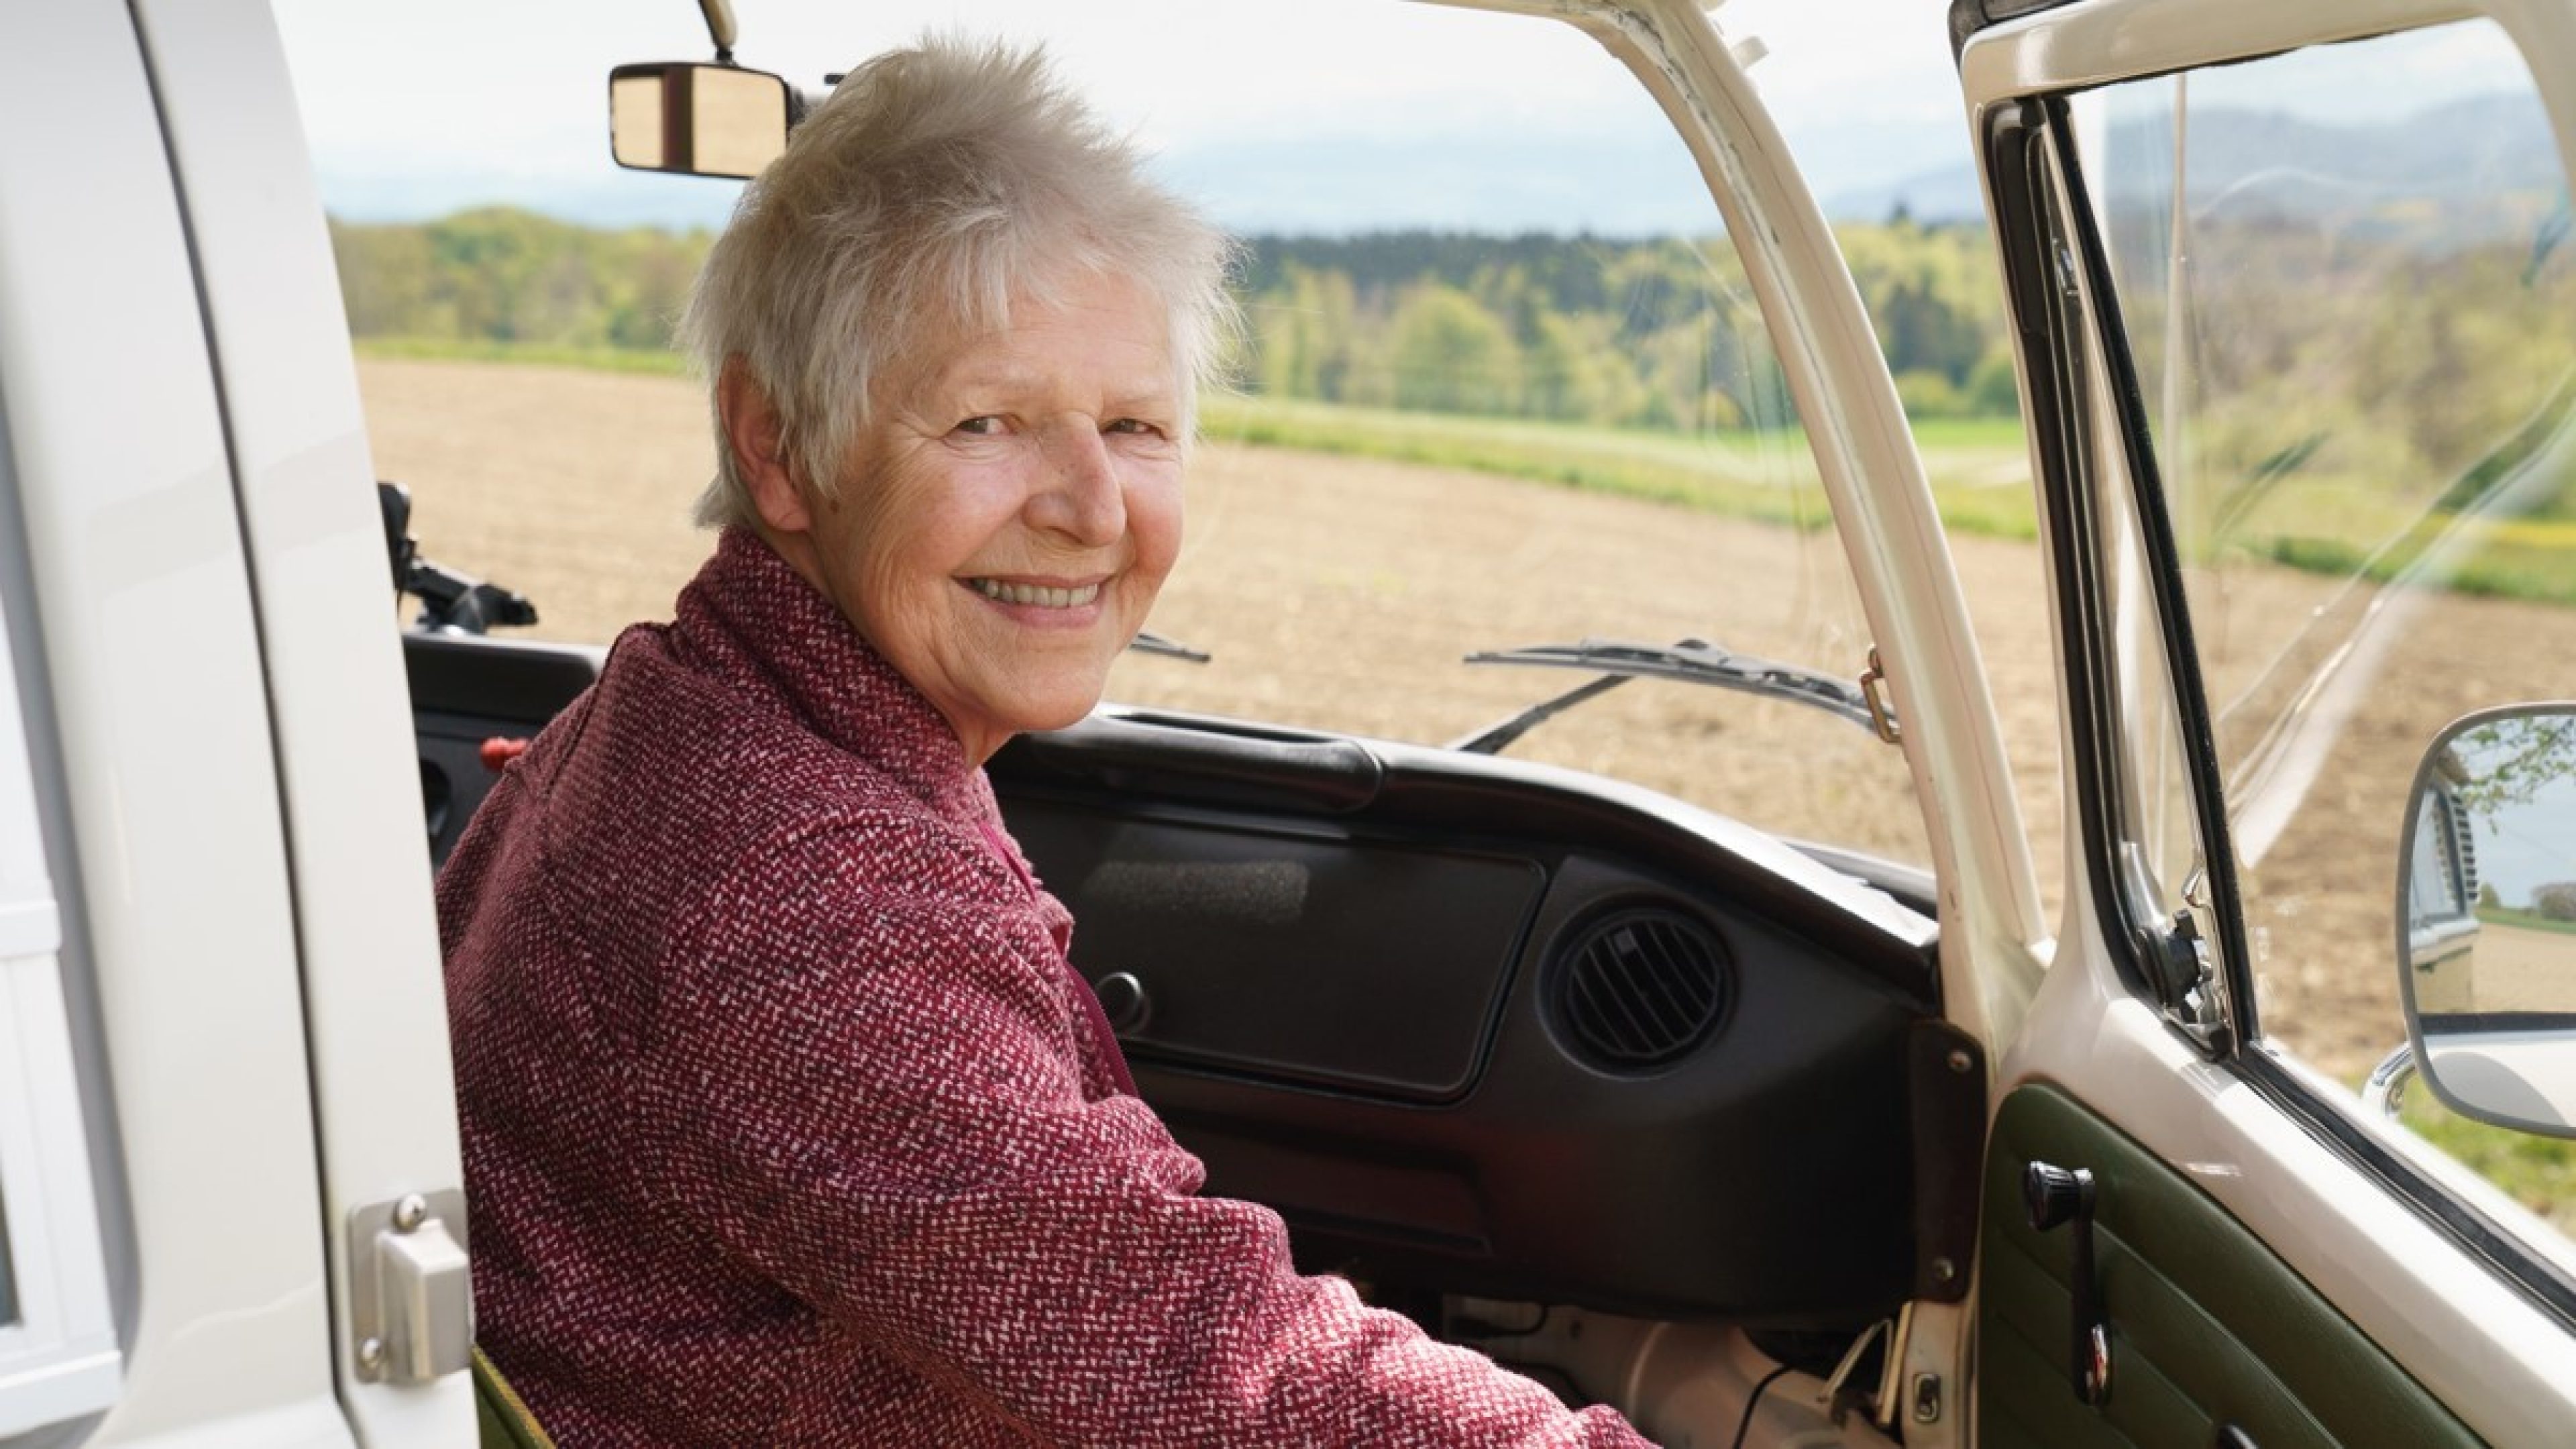 Monica sits in the passenger seat and smiles over her shoulder at the camera while her hand is on the door handle of the open car door. It seems as if she is going to embark on her next journey at any moment. She is wearing a burgundy sweater and in the background there is a field and a forest. 